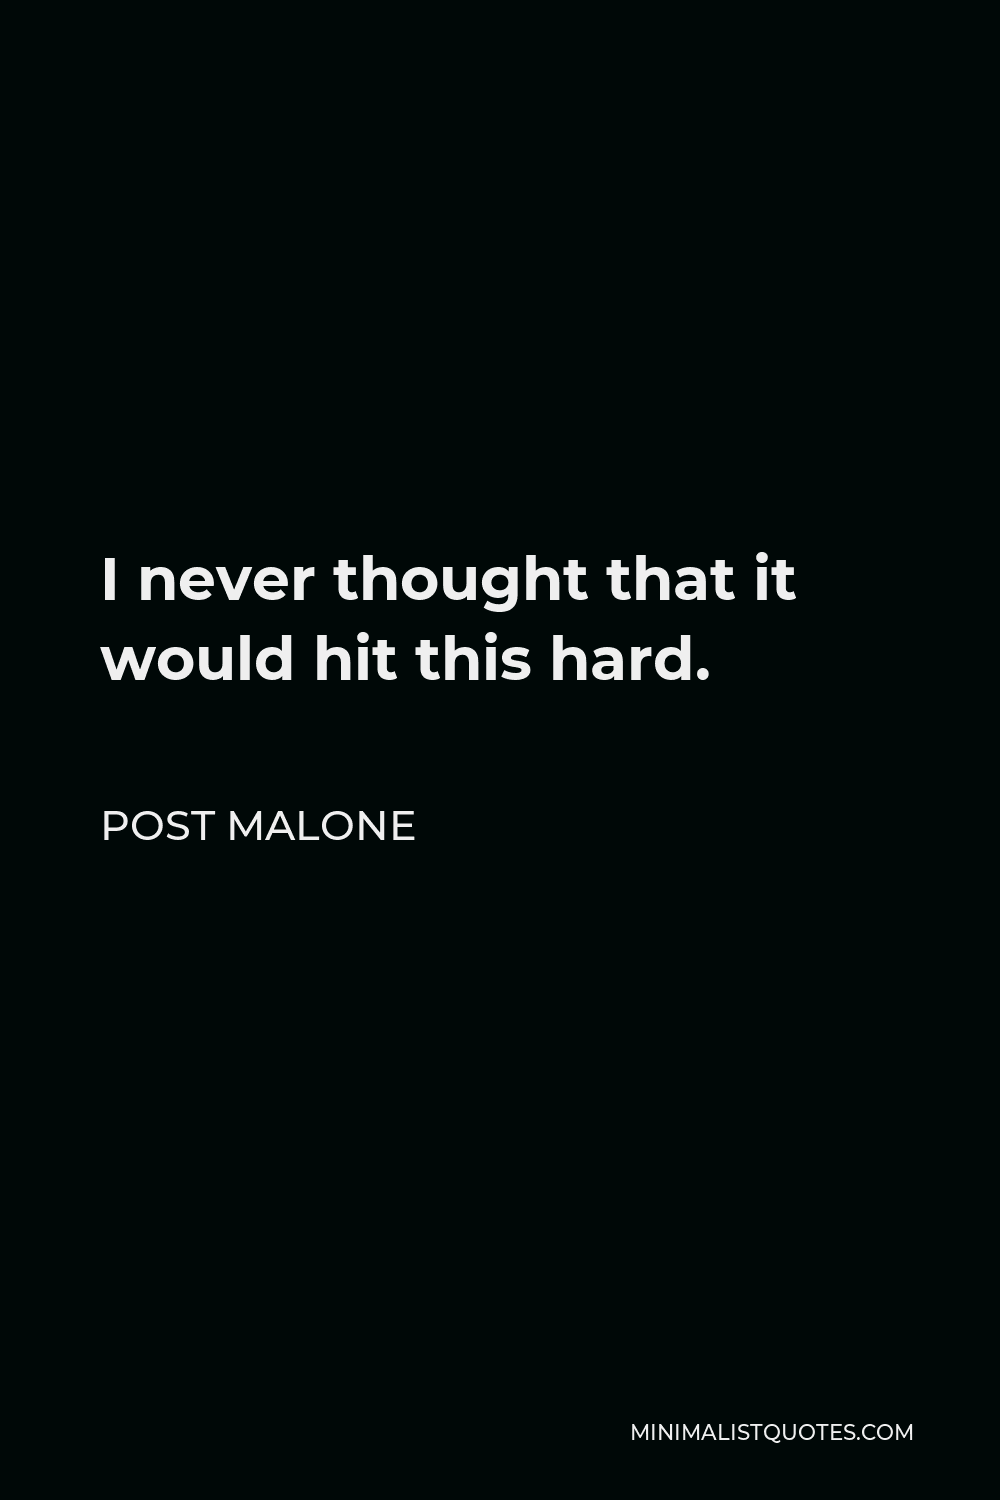 Post Malone Quote: I never thought that it would hit this hard.